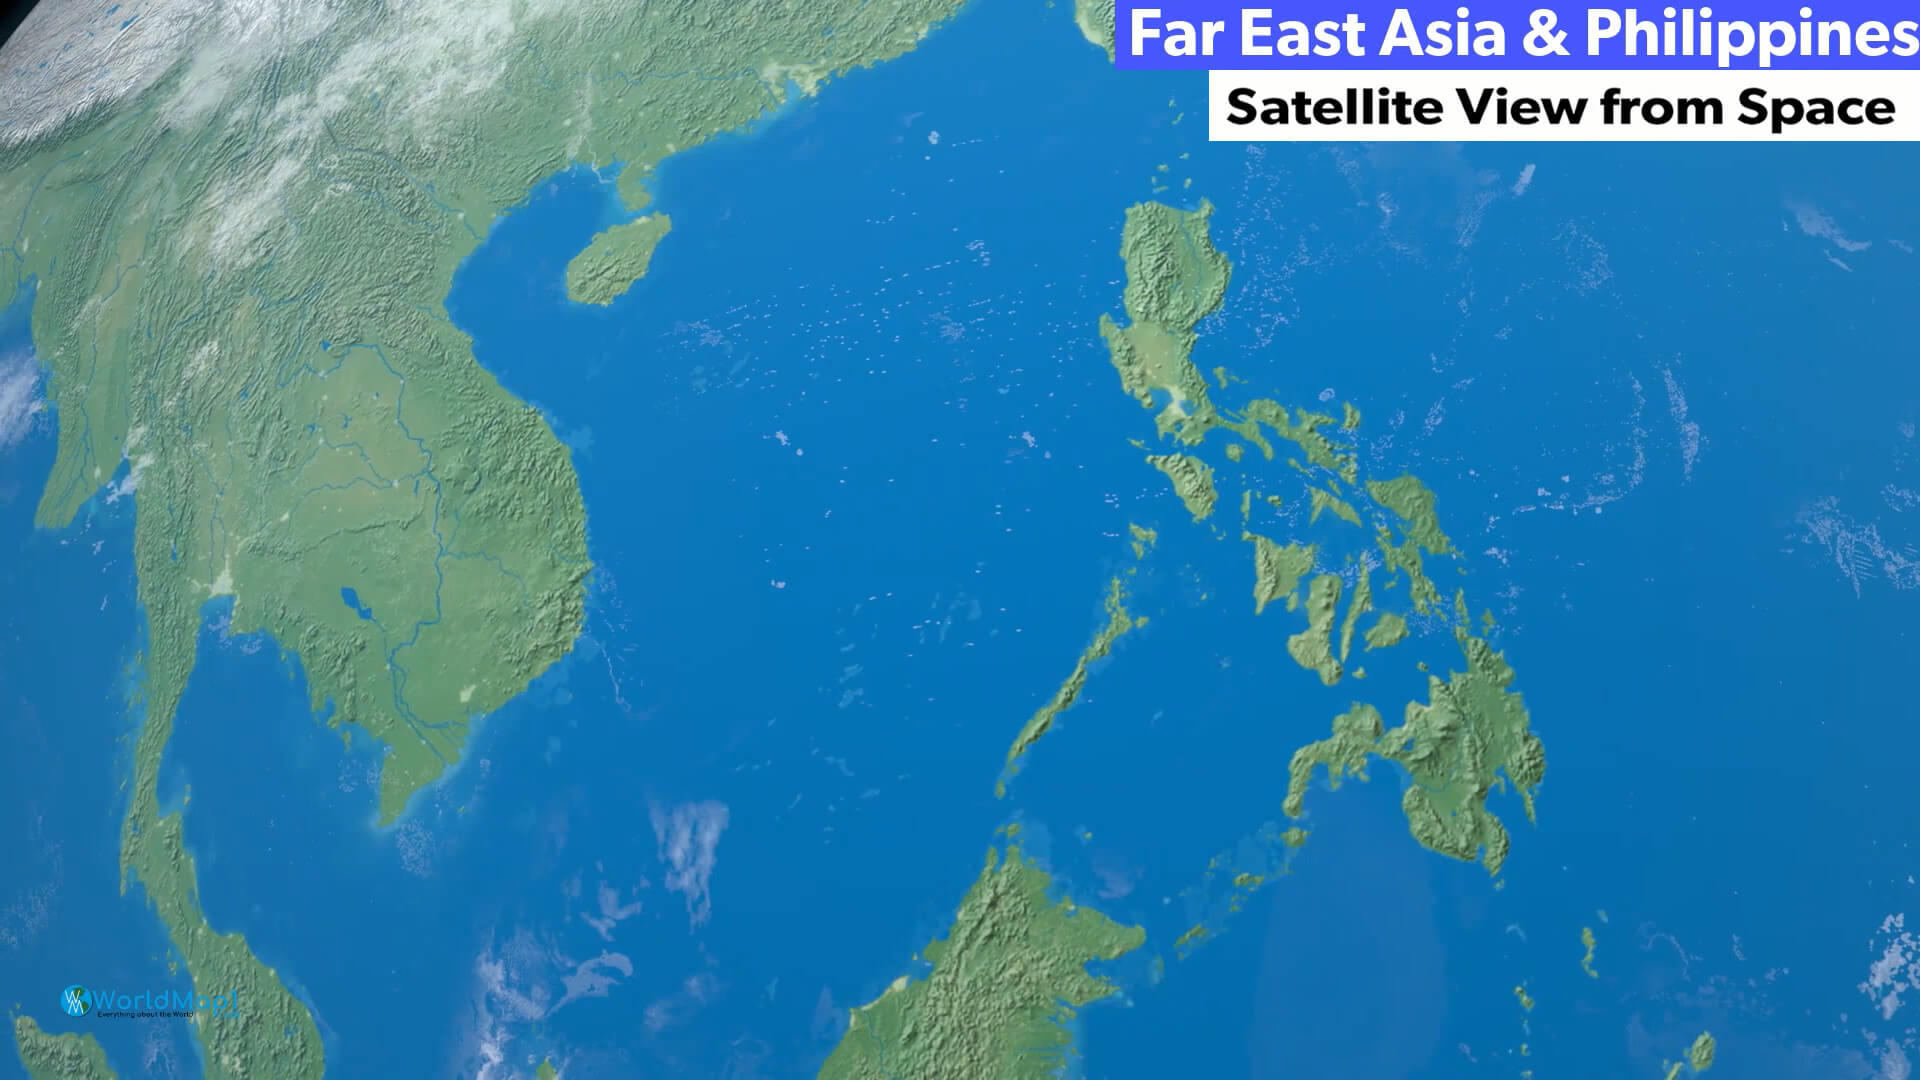 Far East Asia and Philippines Satellite View